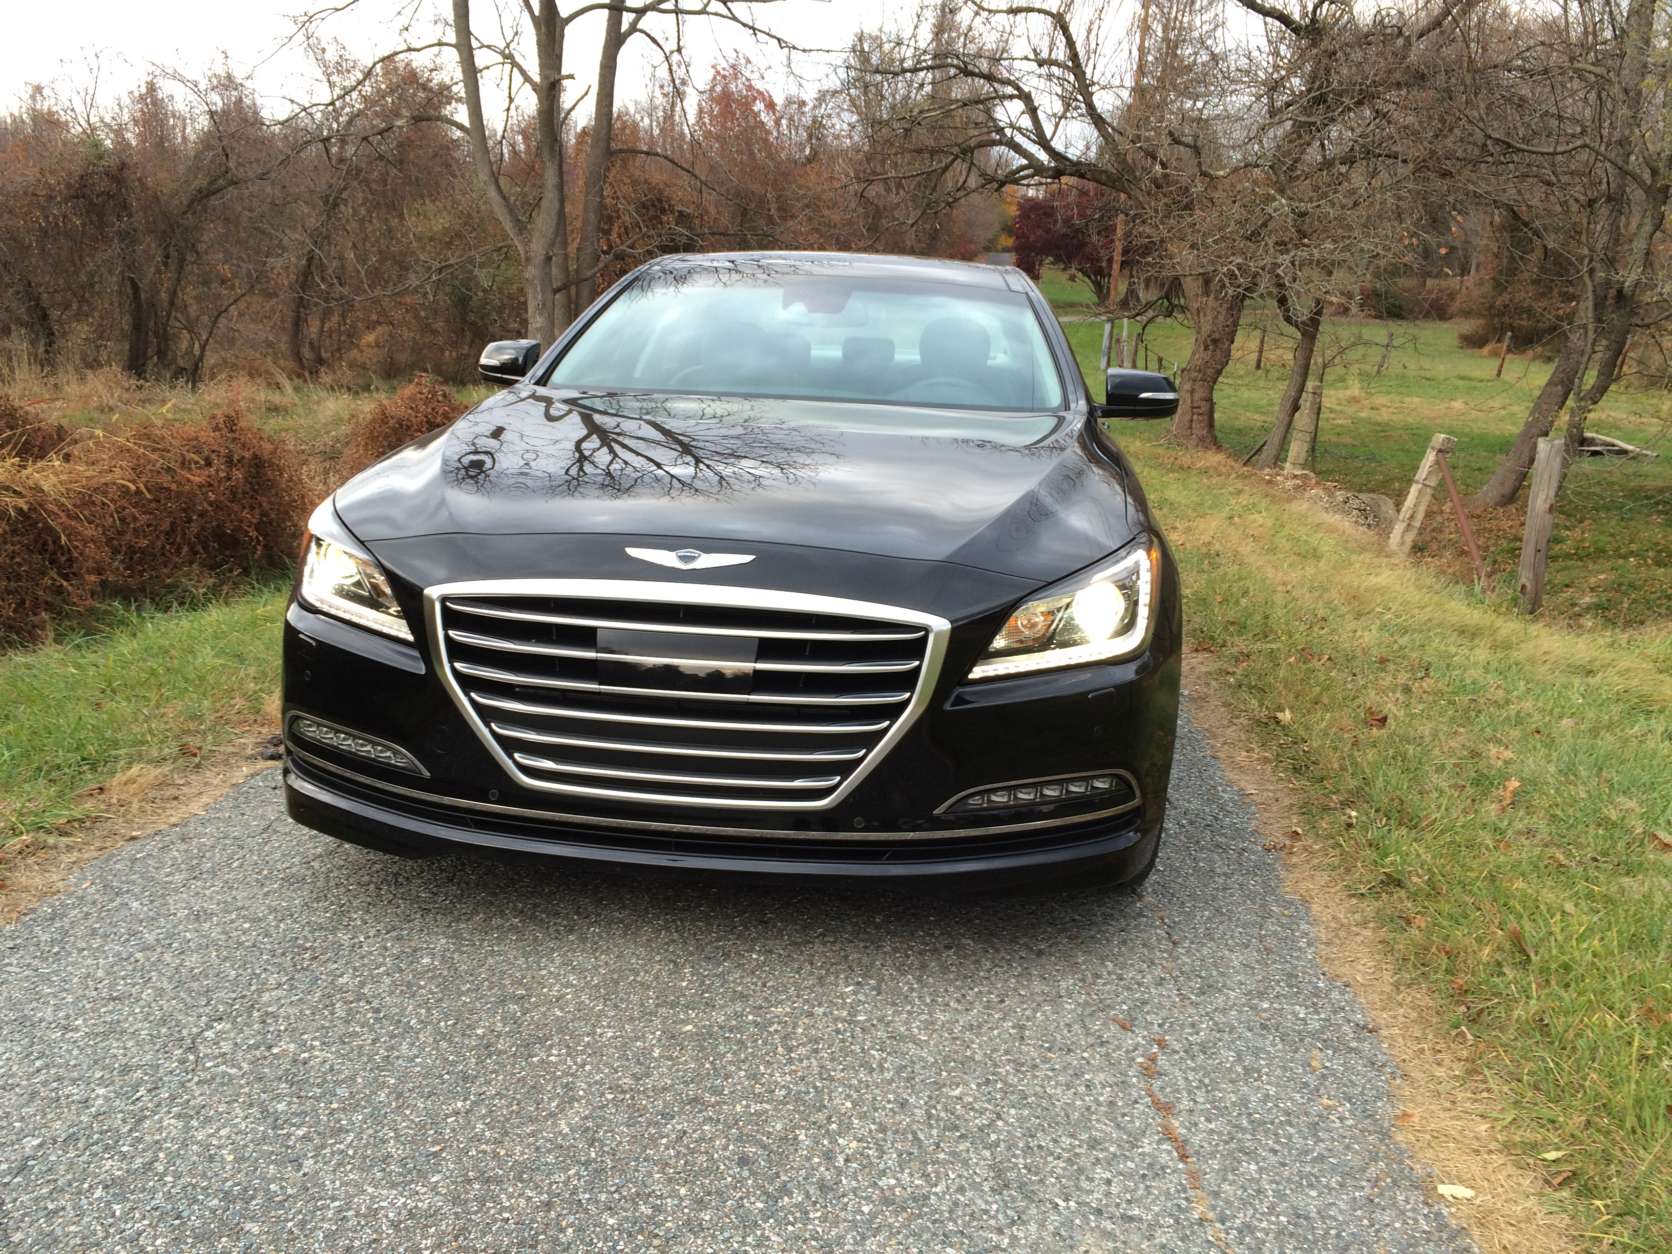 The front end of the Genesis G80 has that large grill like most of the competition, and there are slick LED headlights.(WTOP/Mike Parris)